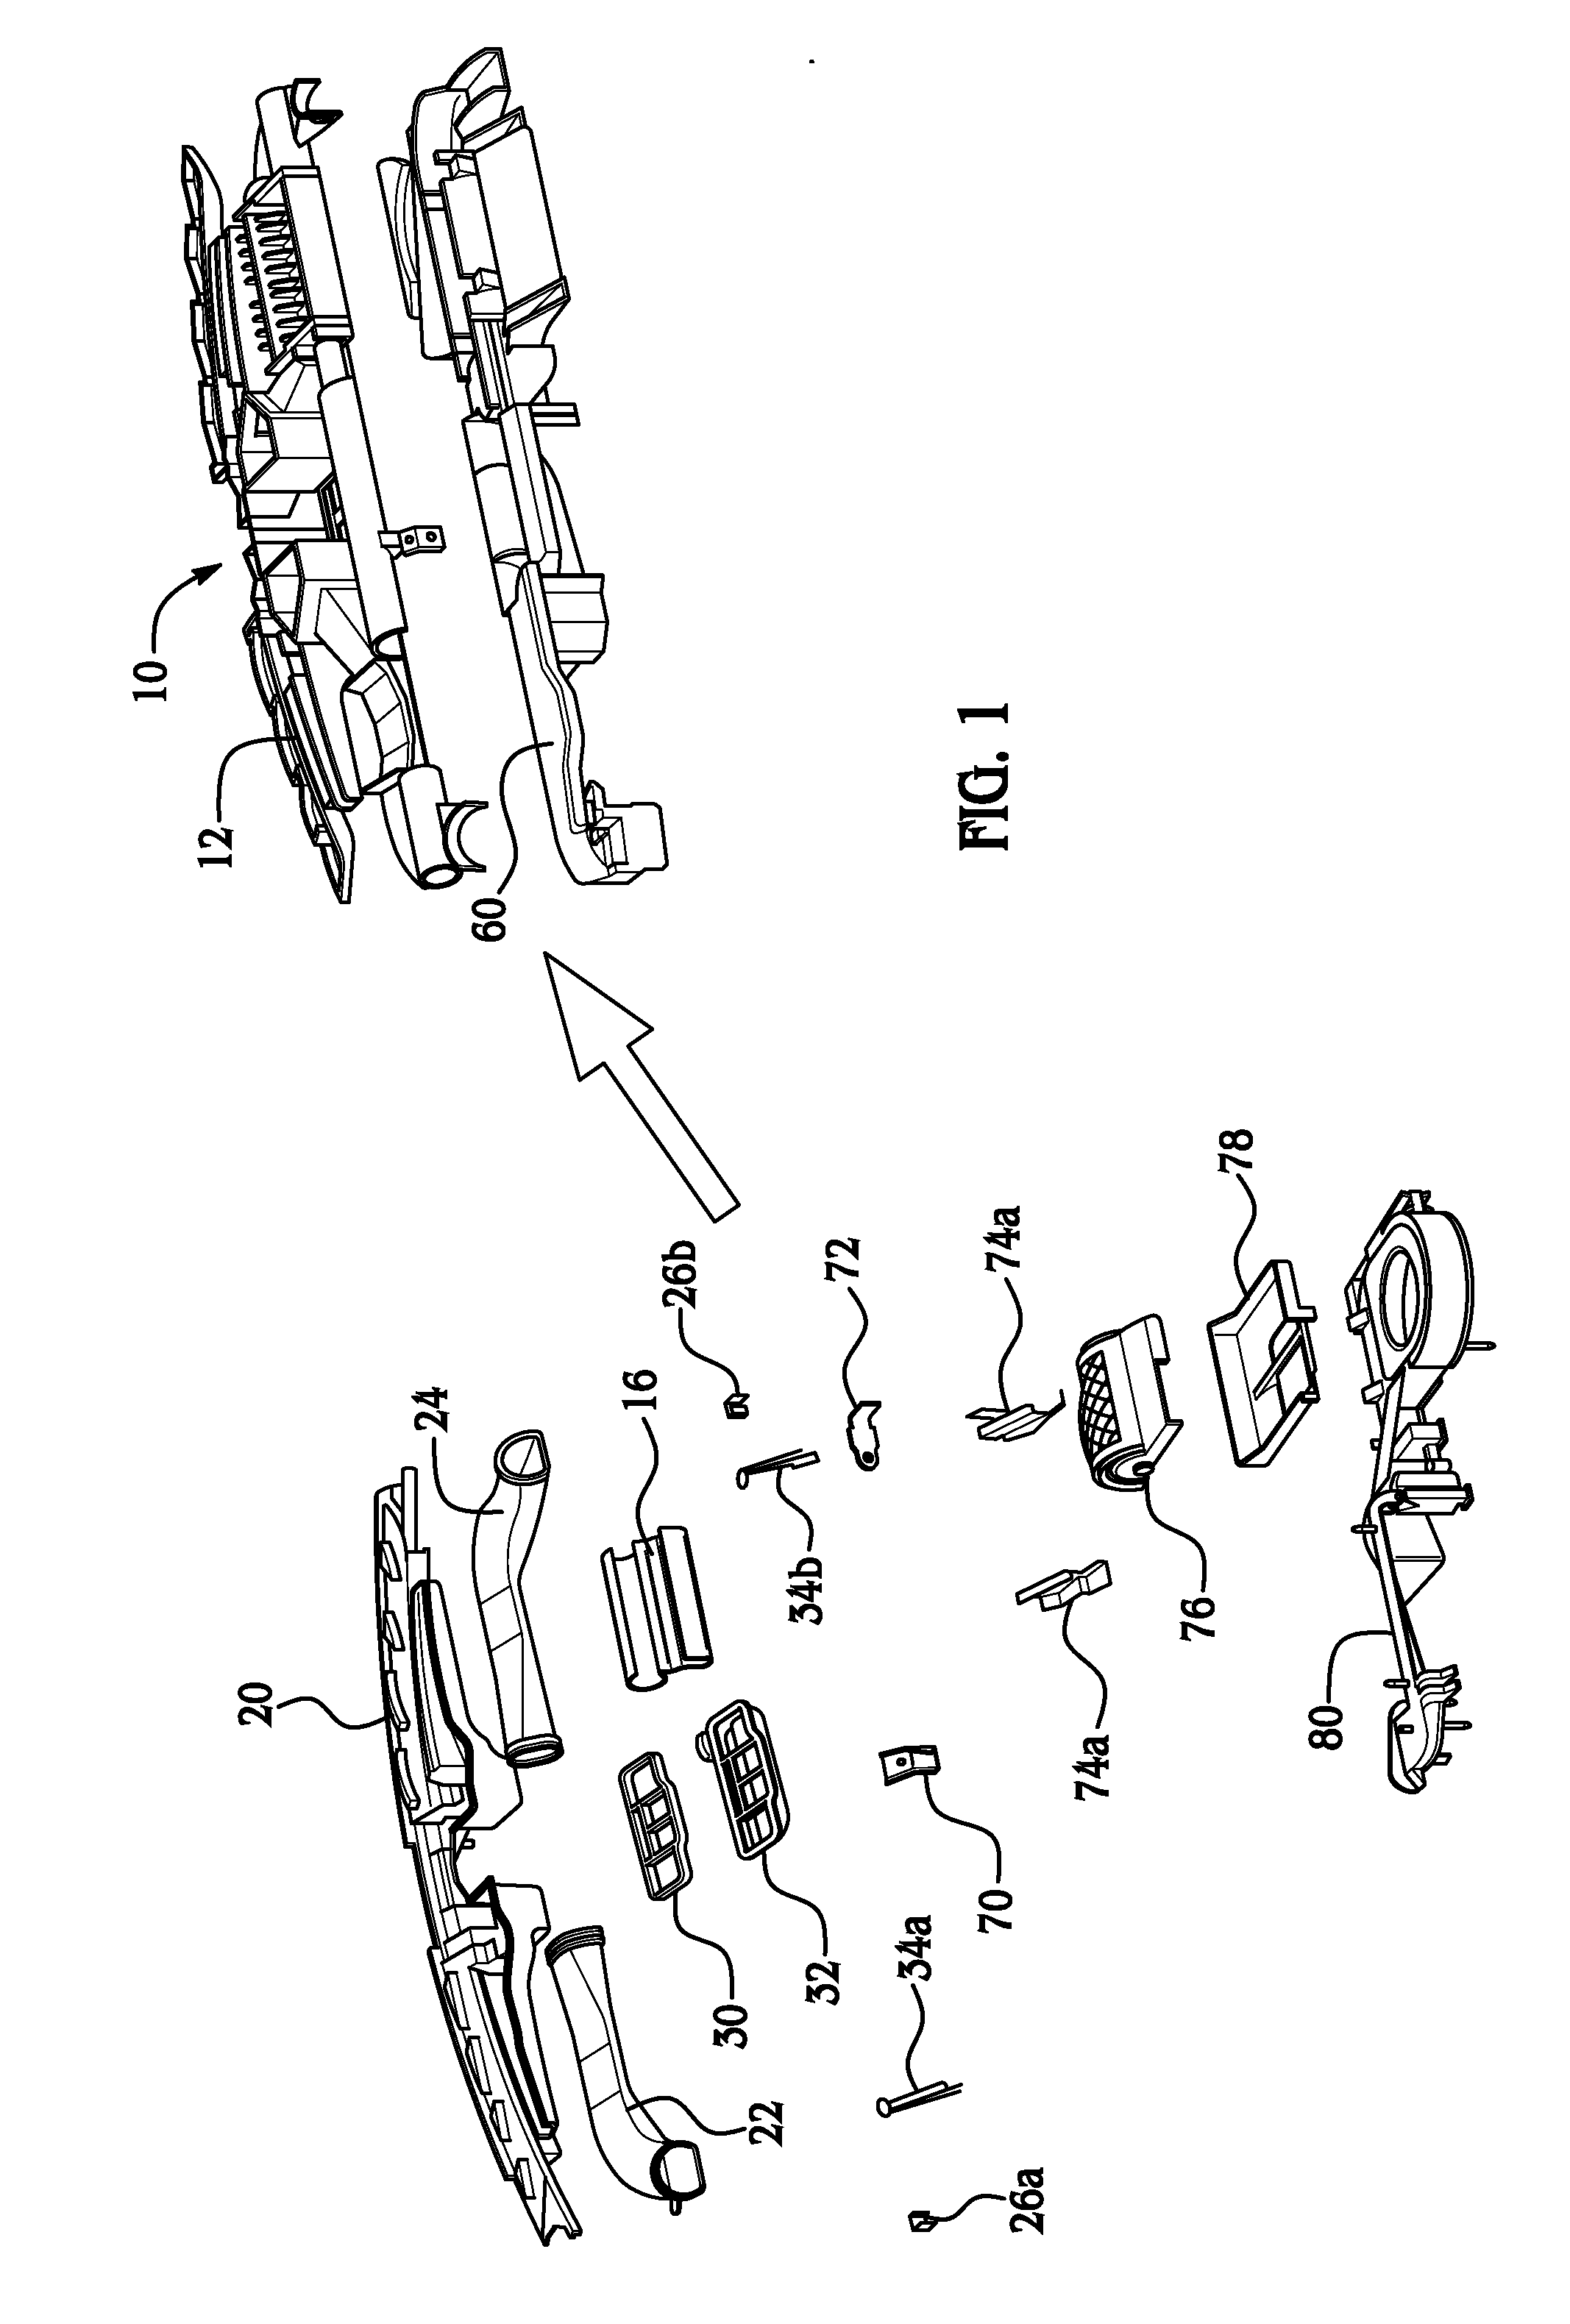 Integrated structural member for a vehicle and method of making